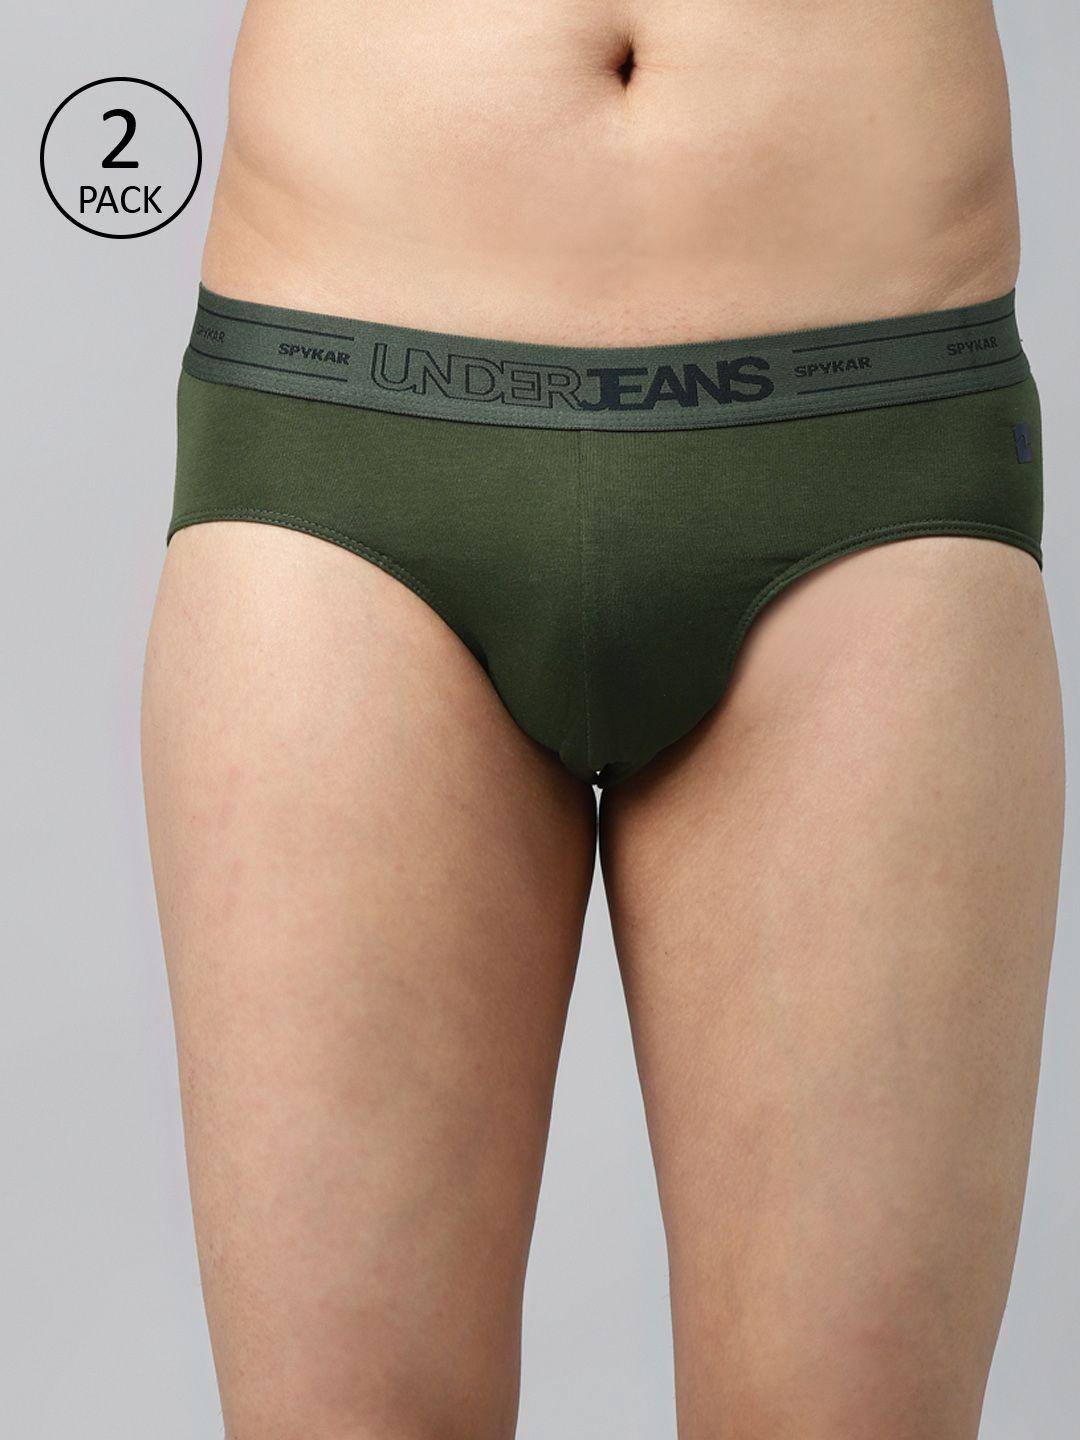 underjeans-by-spykar-men-pack-of-2-olive-green-solid-briefs-8907966428409